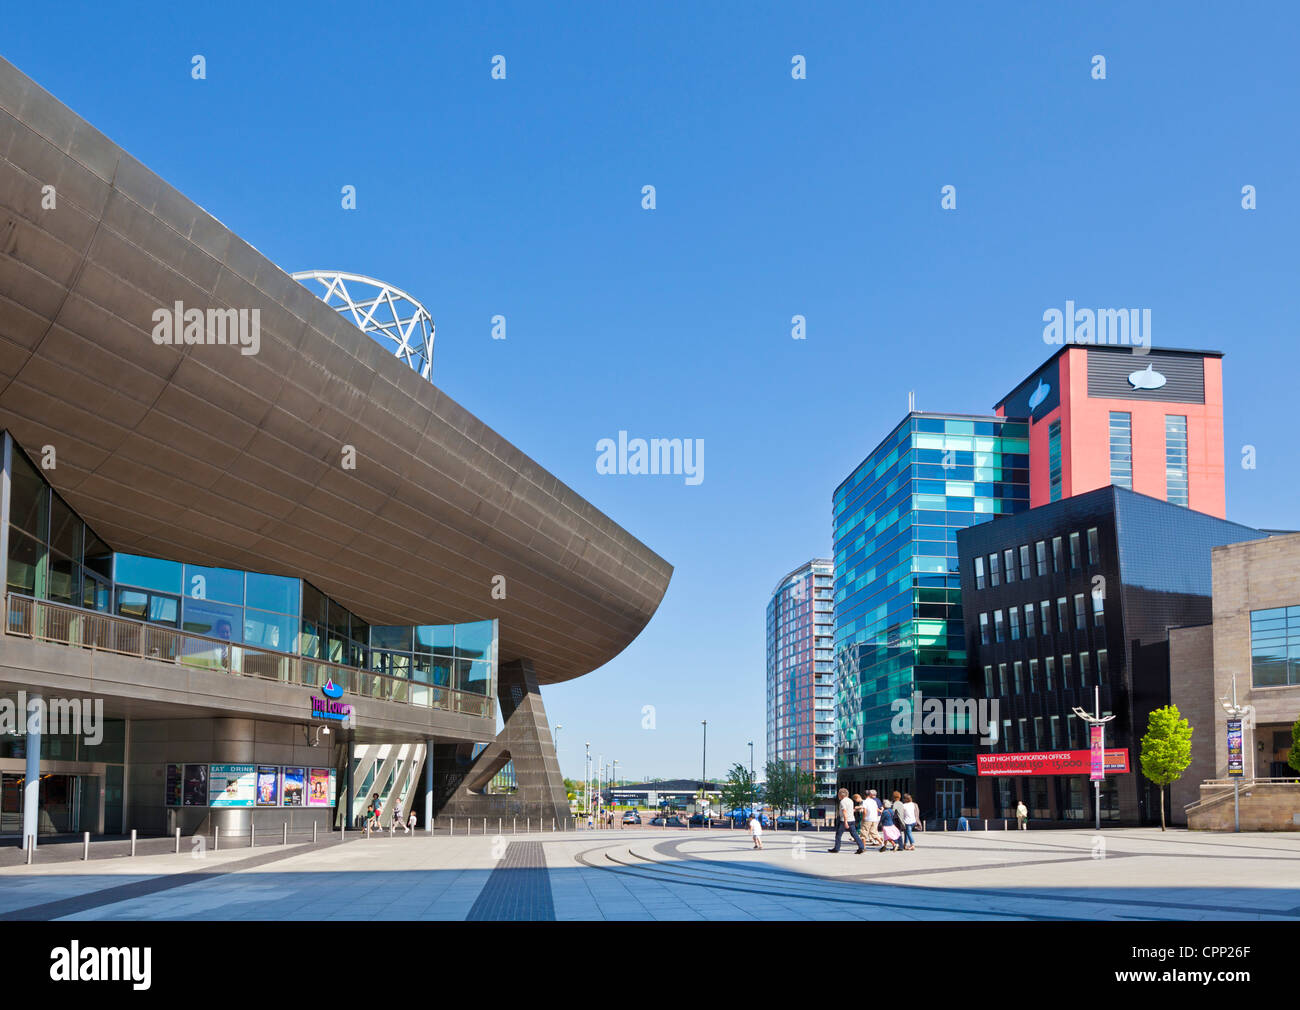 The Lowry Centre at Salford Quays Manchester Greater Manchester Lancashire England GB UK EU Europe Stock Photo